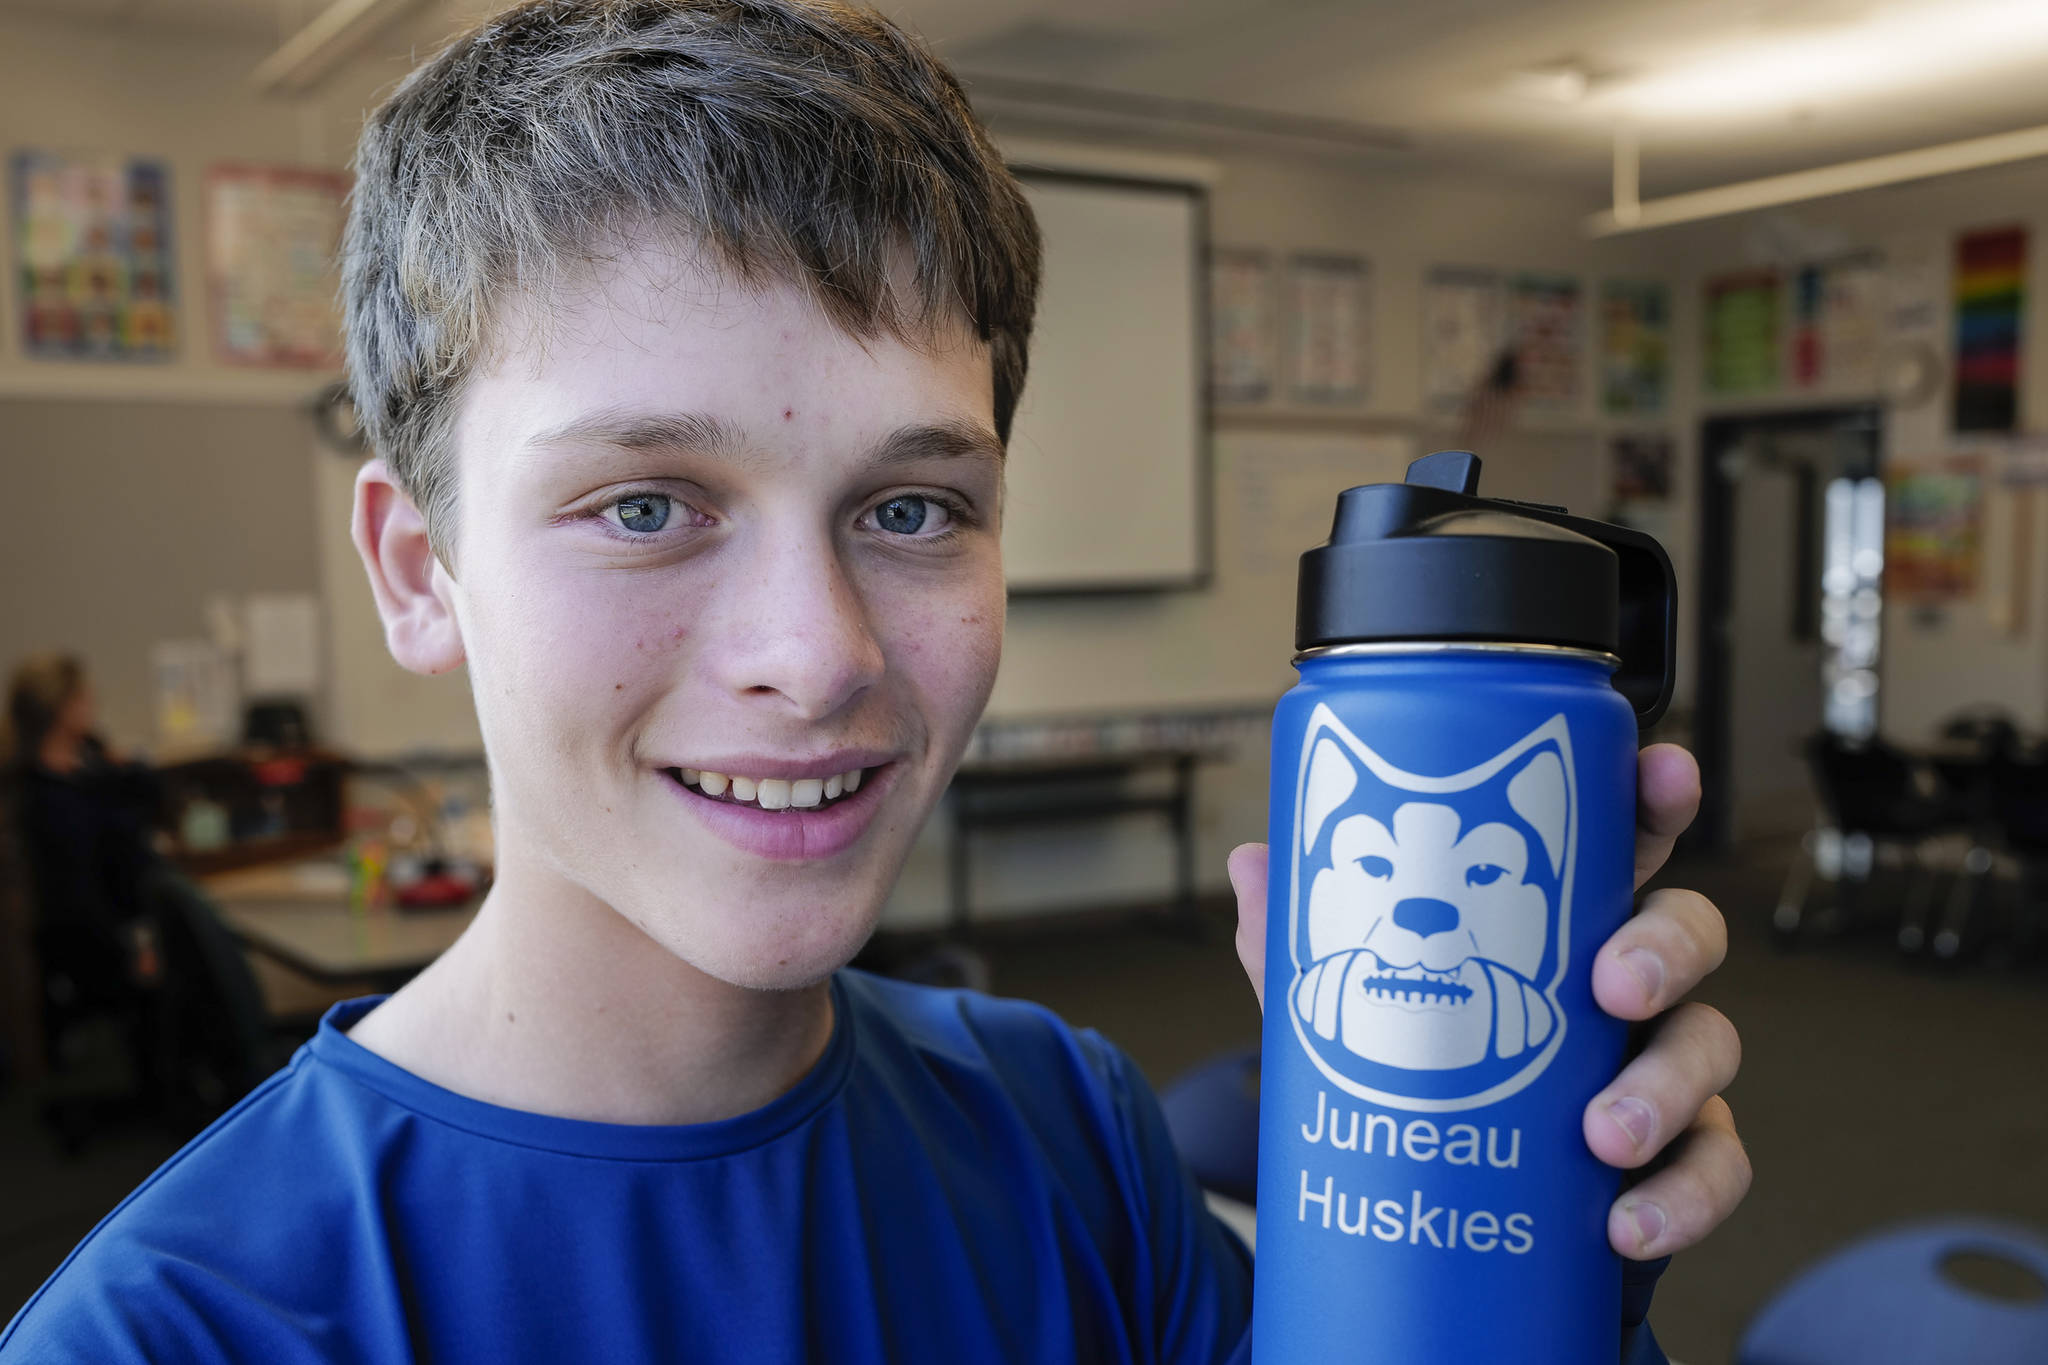 Alain Soltys-Gray, a sophomore at Thunder Mountain High School, displays his logo design for the Juneau Huskies football team at TMHS on Wednesday, Aug. 28, 2019. (Michael Penn | Juneau Empire)